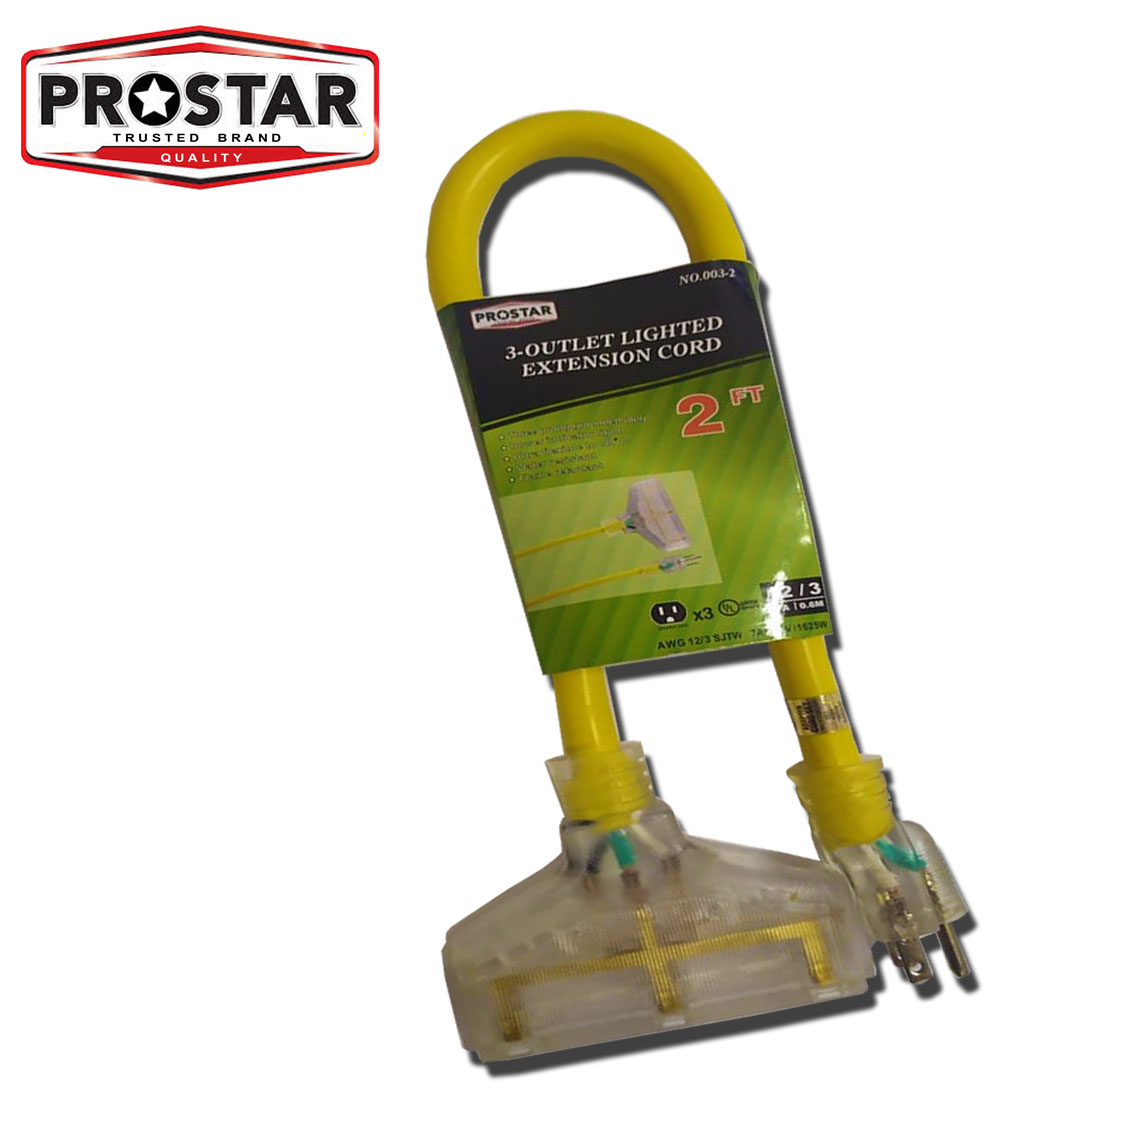 Prostar 2FT (Yellow) 3 Outlet Lighted Extension Cord Outdoor Rated